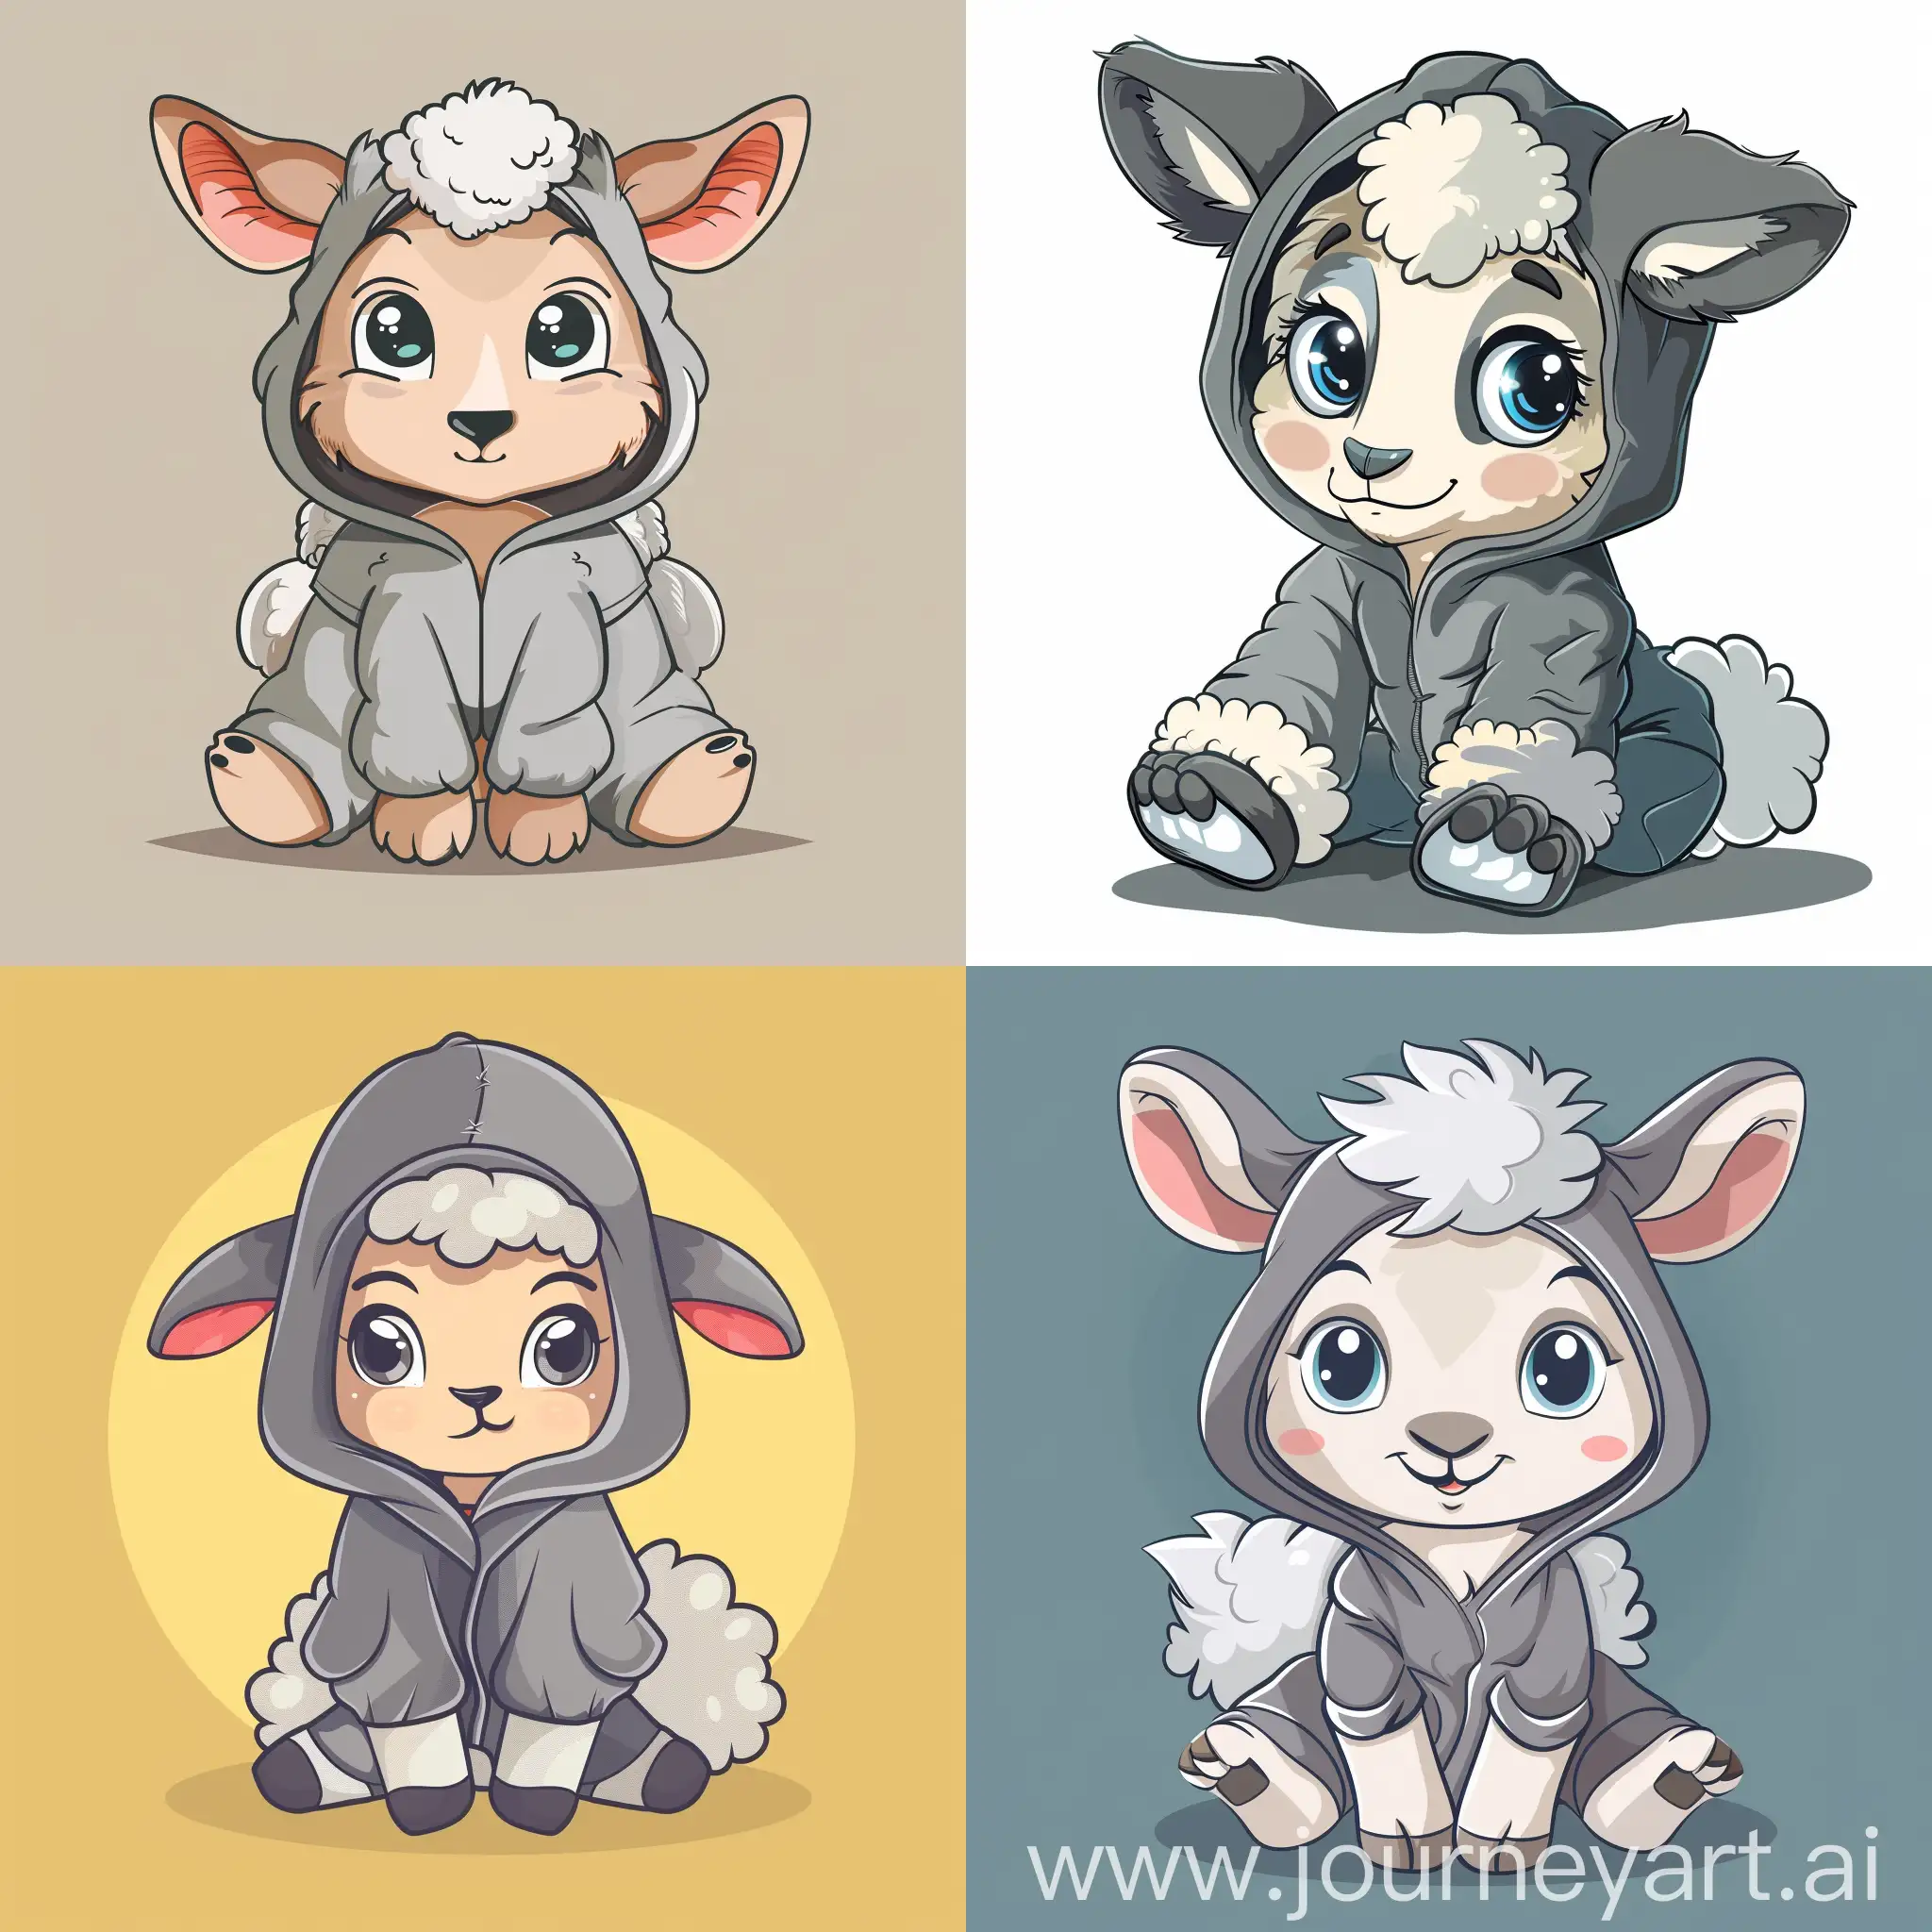 Cute cartoon of a baby lamb wearing a Wolf suit